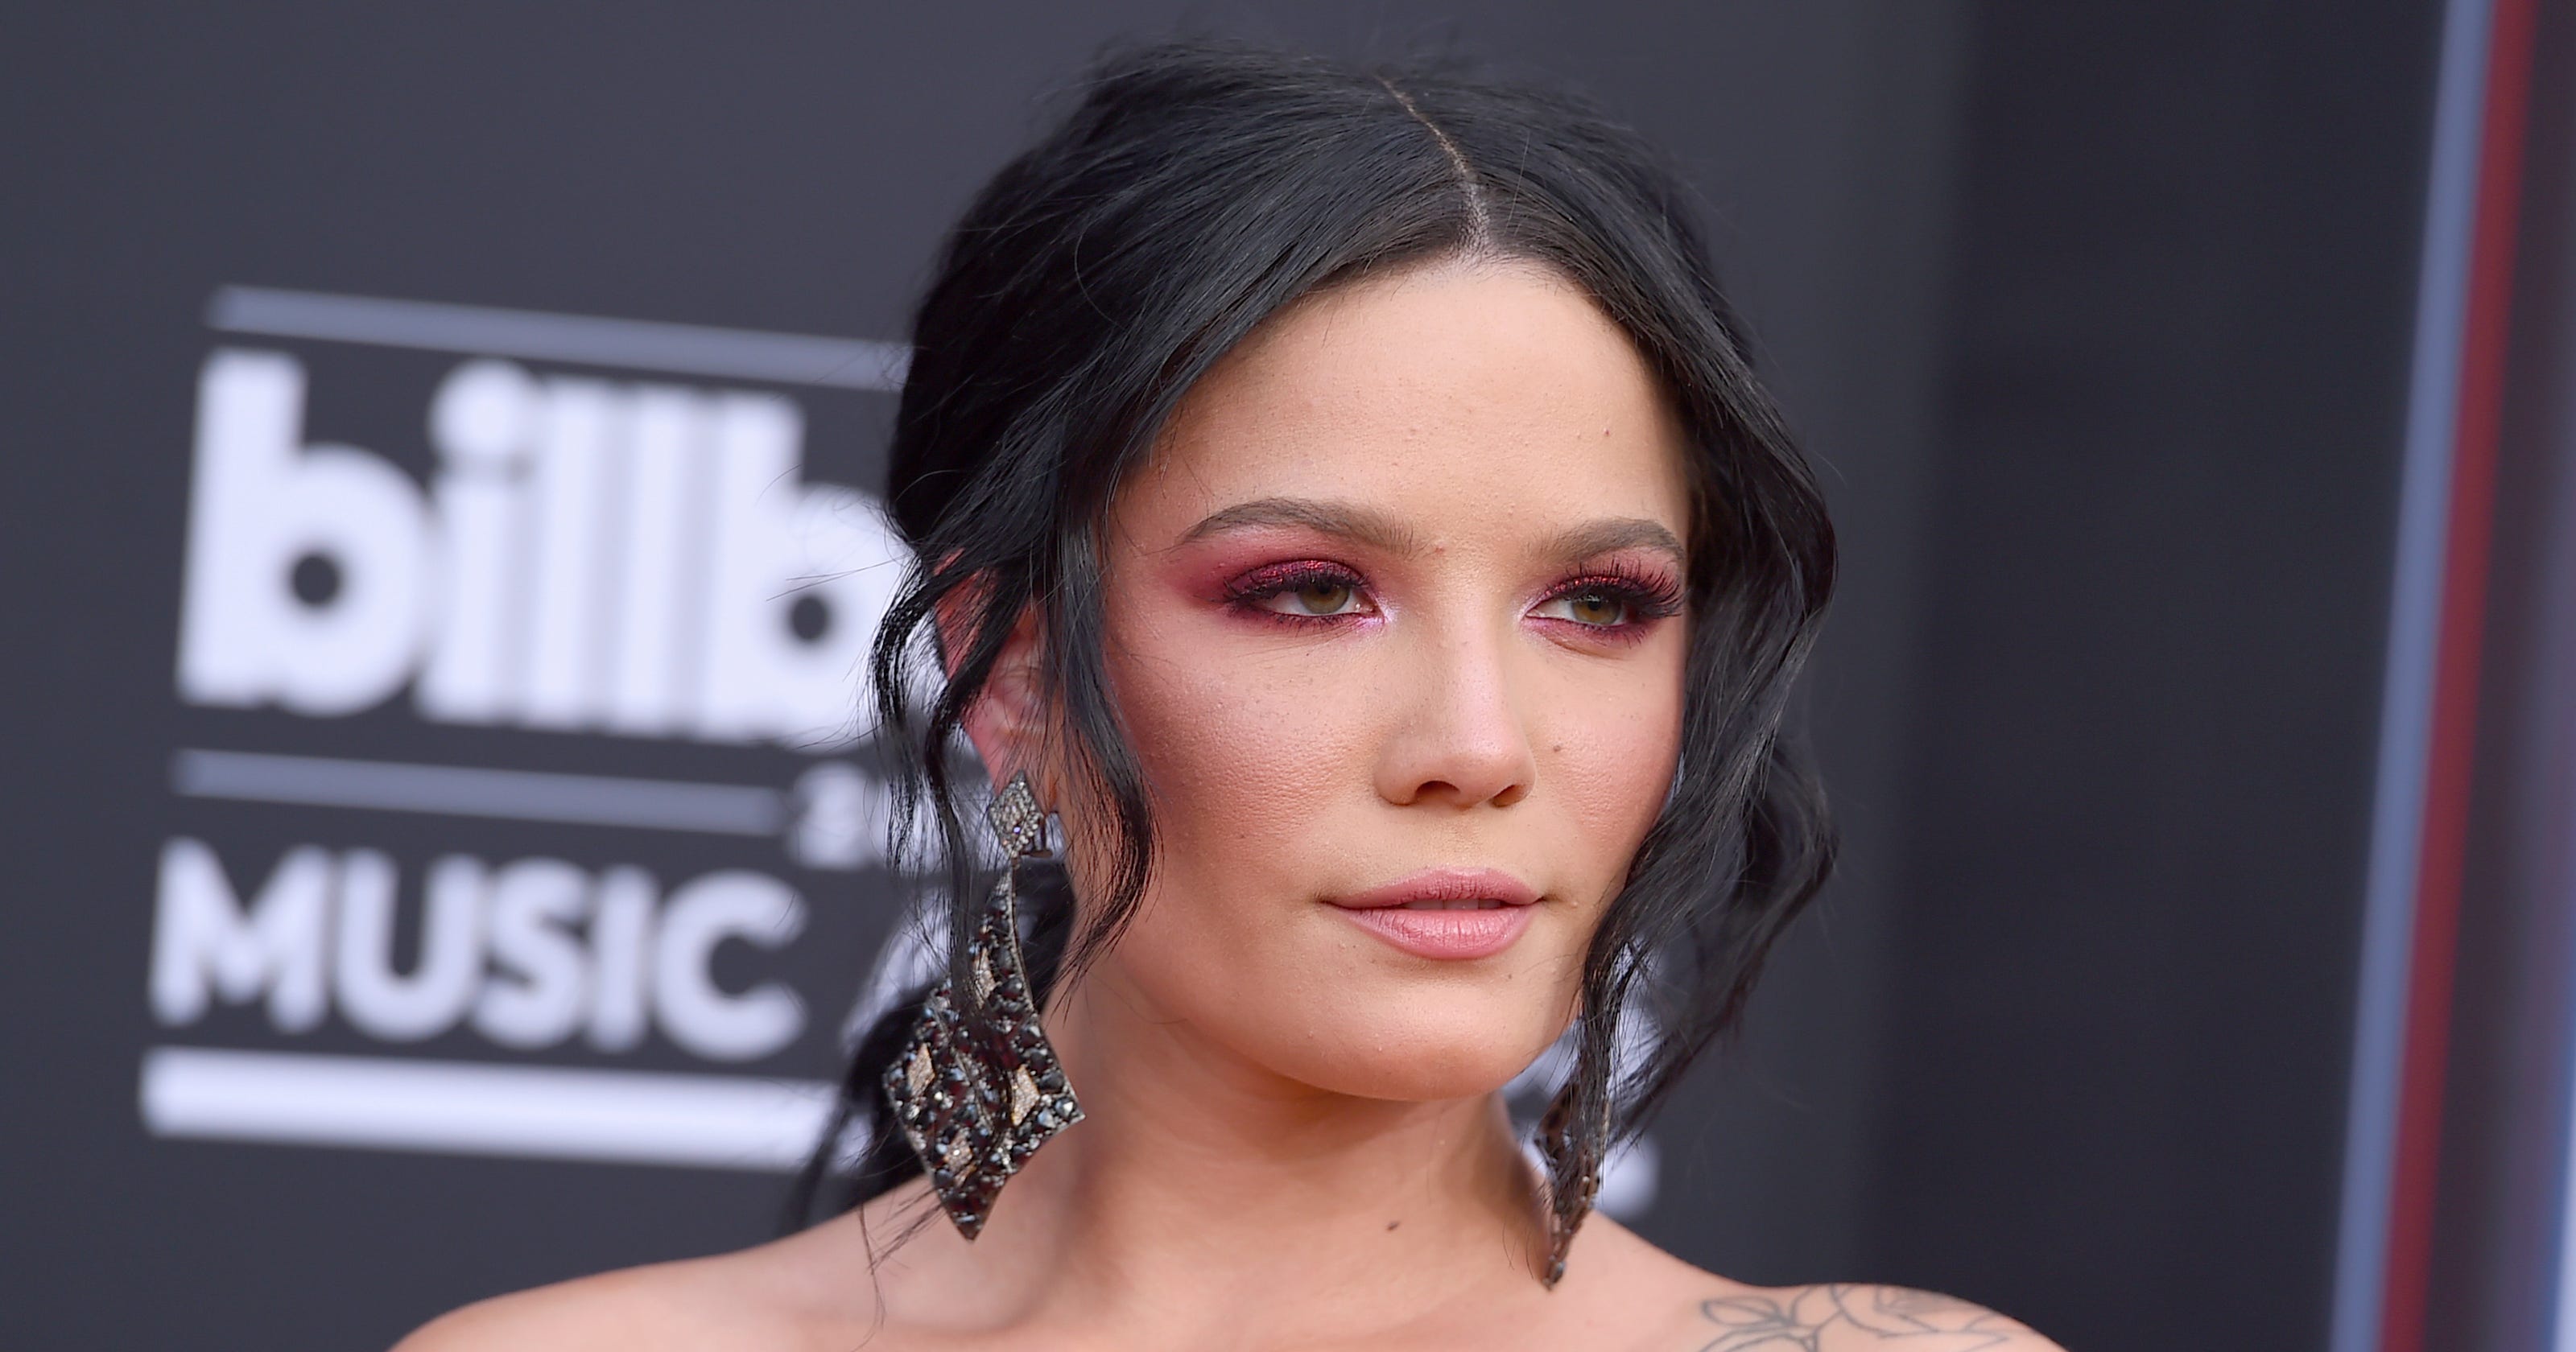 Halsey says she had an asthma attack, treated by medics during concert3200 x 1680